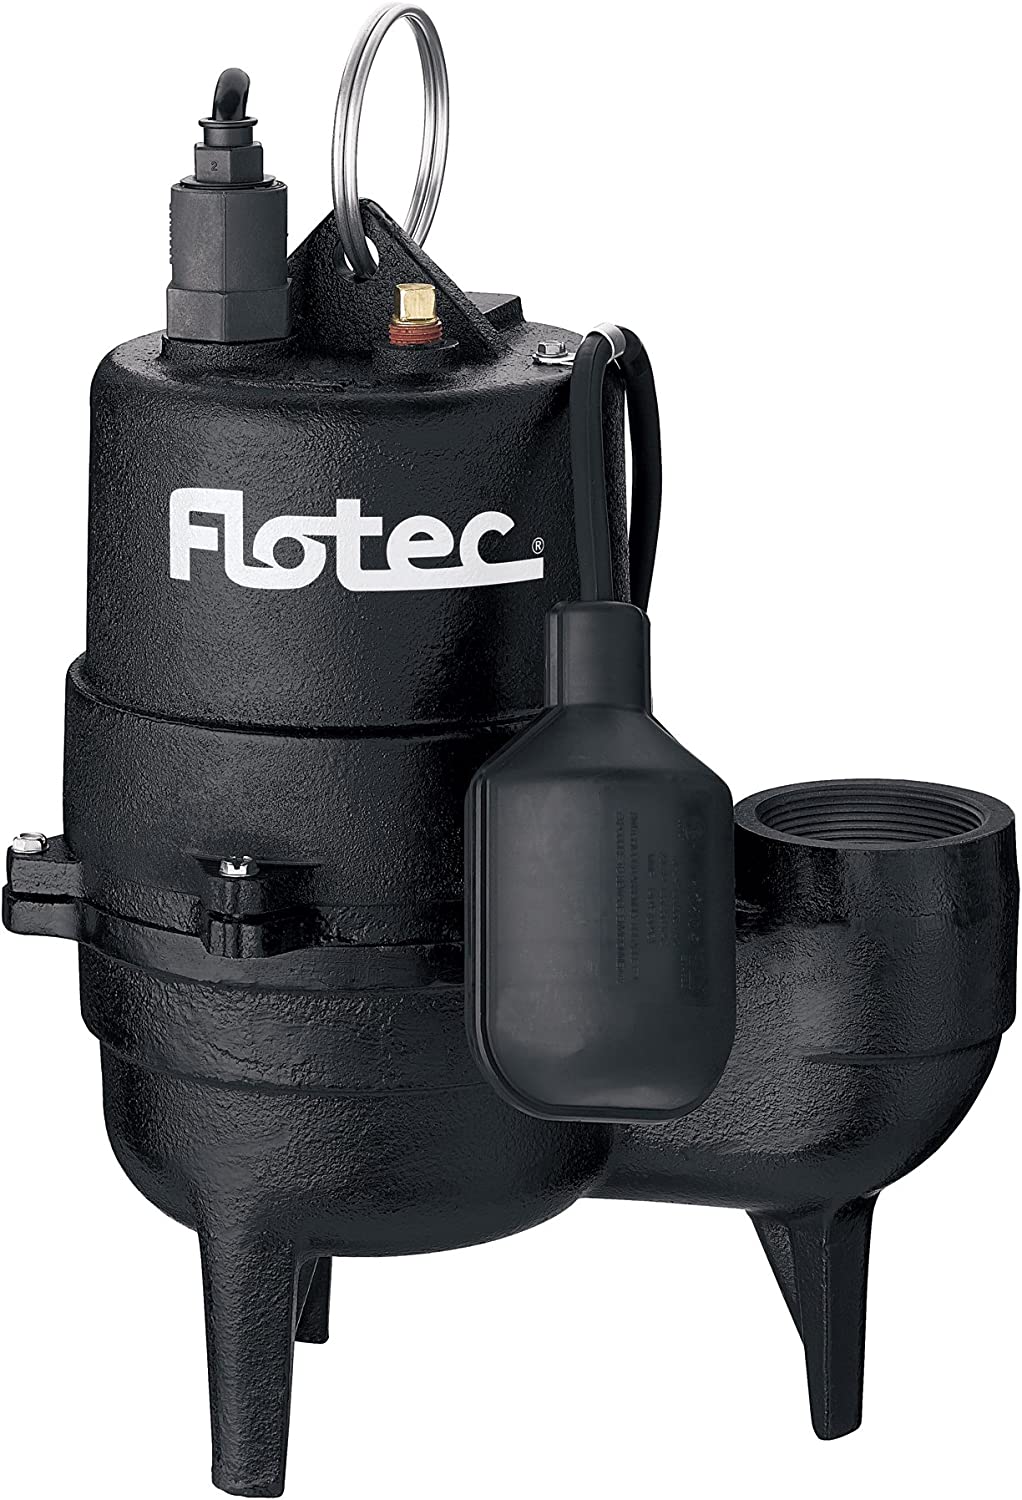 Flotec FPSE3601A Cast Iron Sewage Pump with Tethered Float Switch | 1/2 HP | 120V